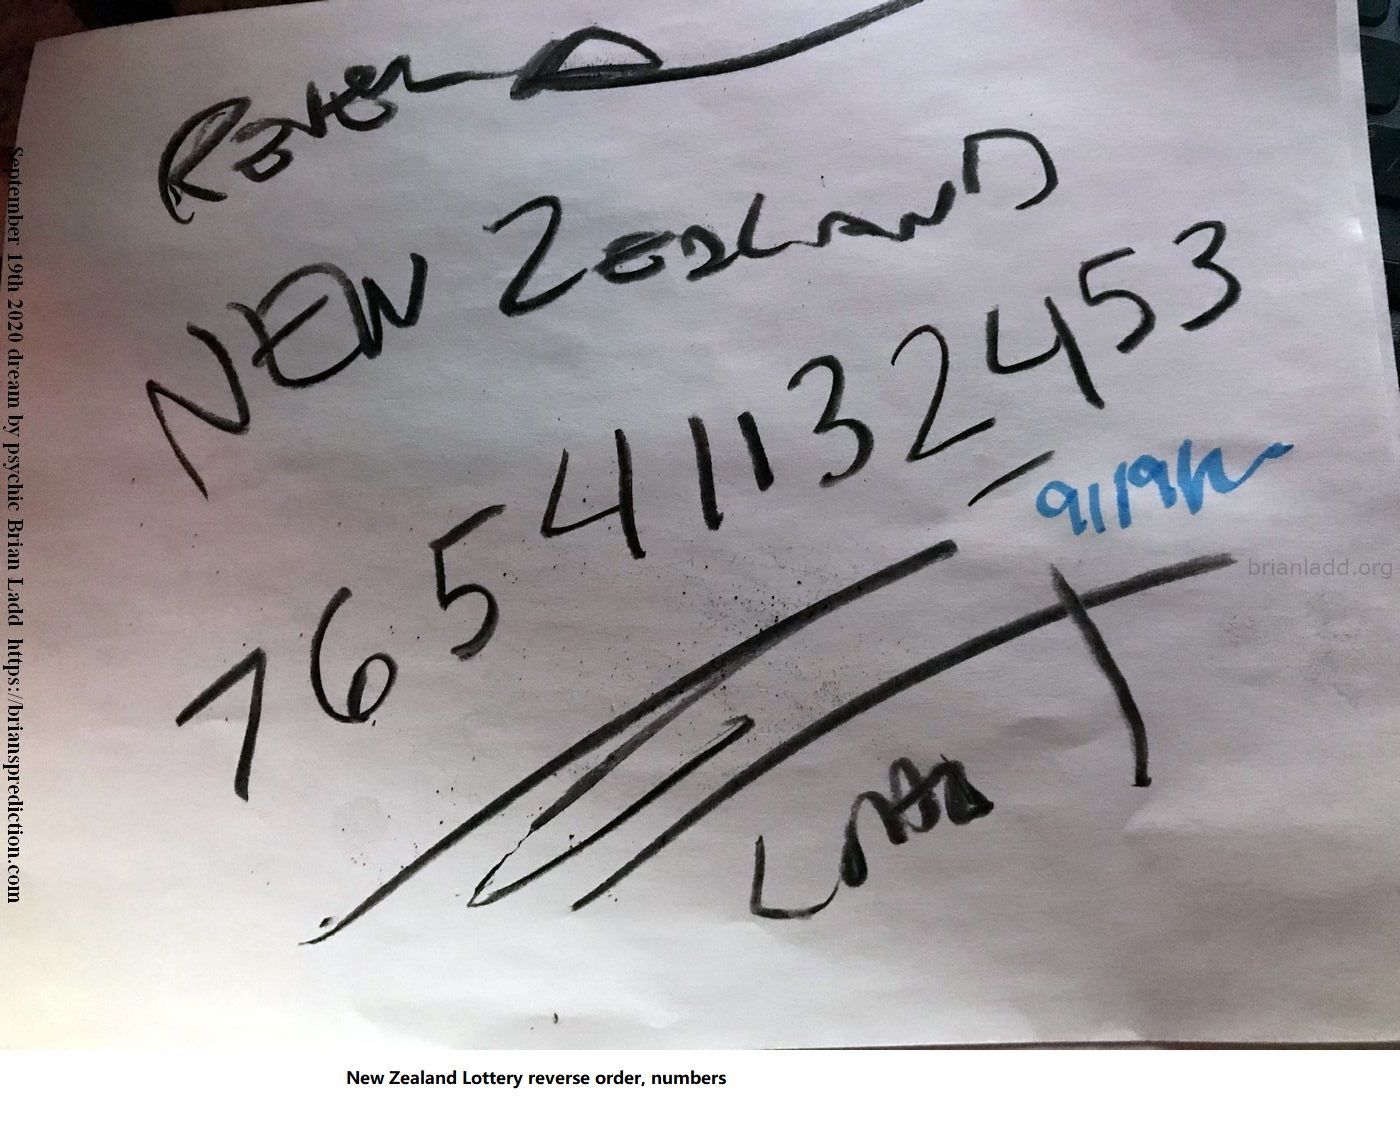 13667 19 September 2020 9 - New Zealand Lottery Reverse Order, Numbers....
New Zealand Lottery Reverse Order, Numbers.  ( NEW!  Free lottery picks by mail, I will personally fill out your blank lottery sheet and mail it back to you for free, postage is included!  visit  https://briansprediction.com/picksbymail   )
